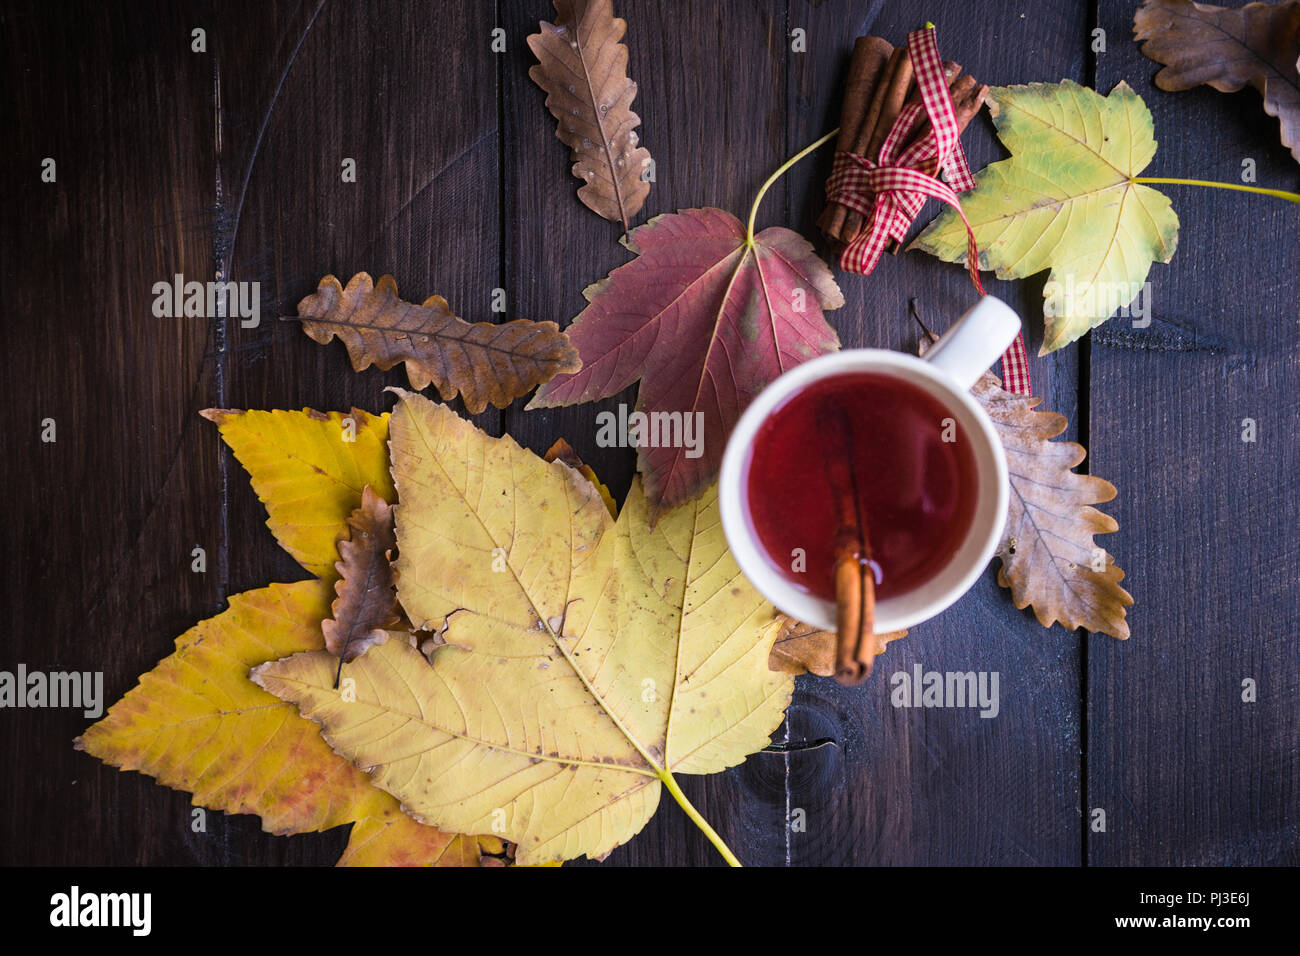 Cup of mulled tea with cinnamon stick and anise star on rustic table with brigt yellow leaves Stock Photo